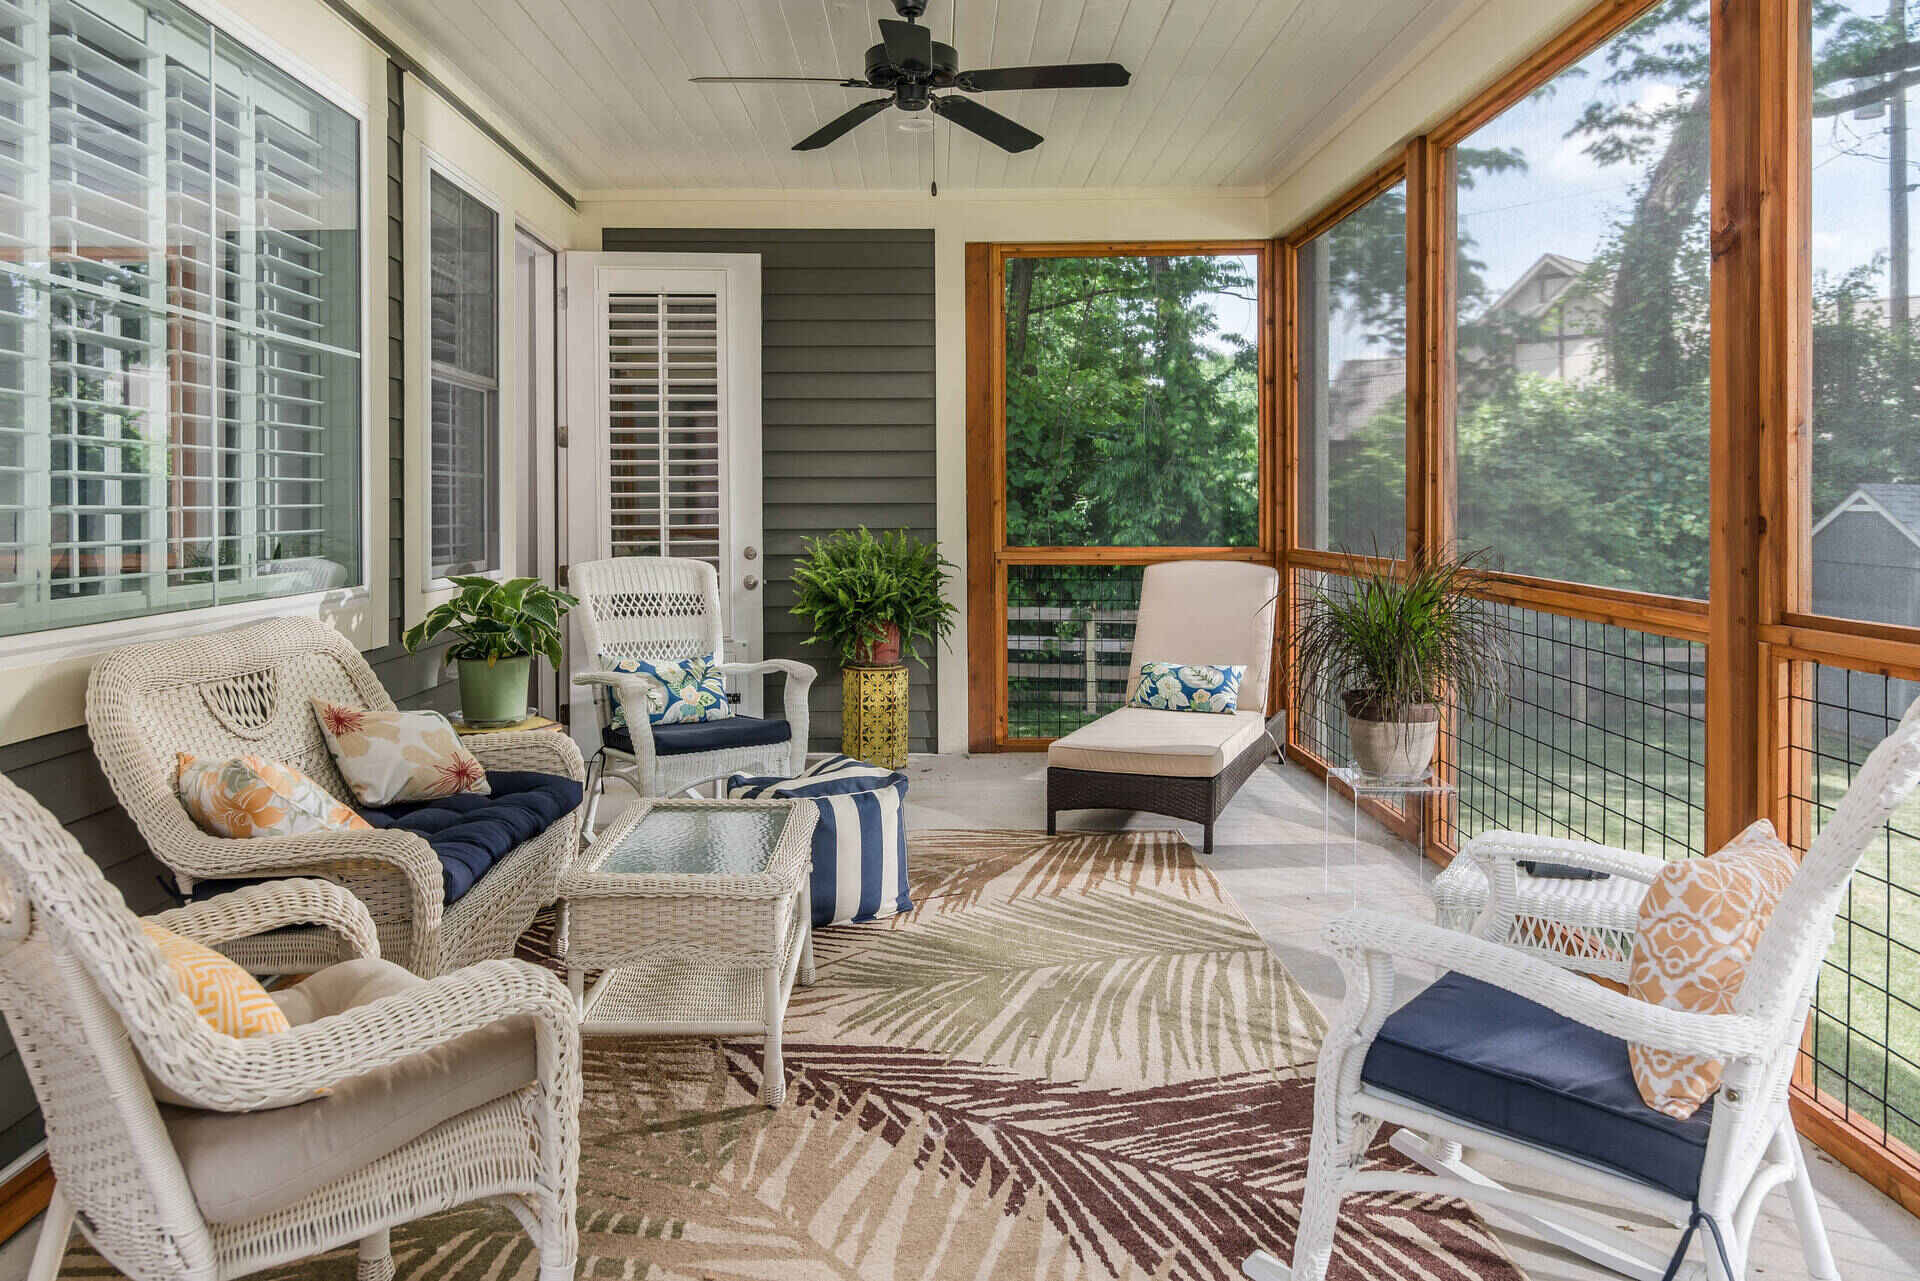 How To Decorate A Screened-In Porch